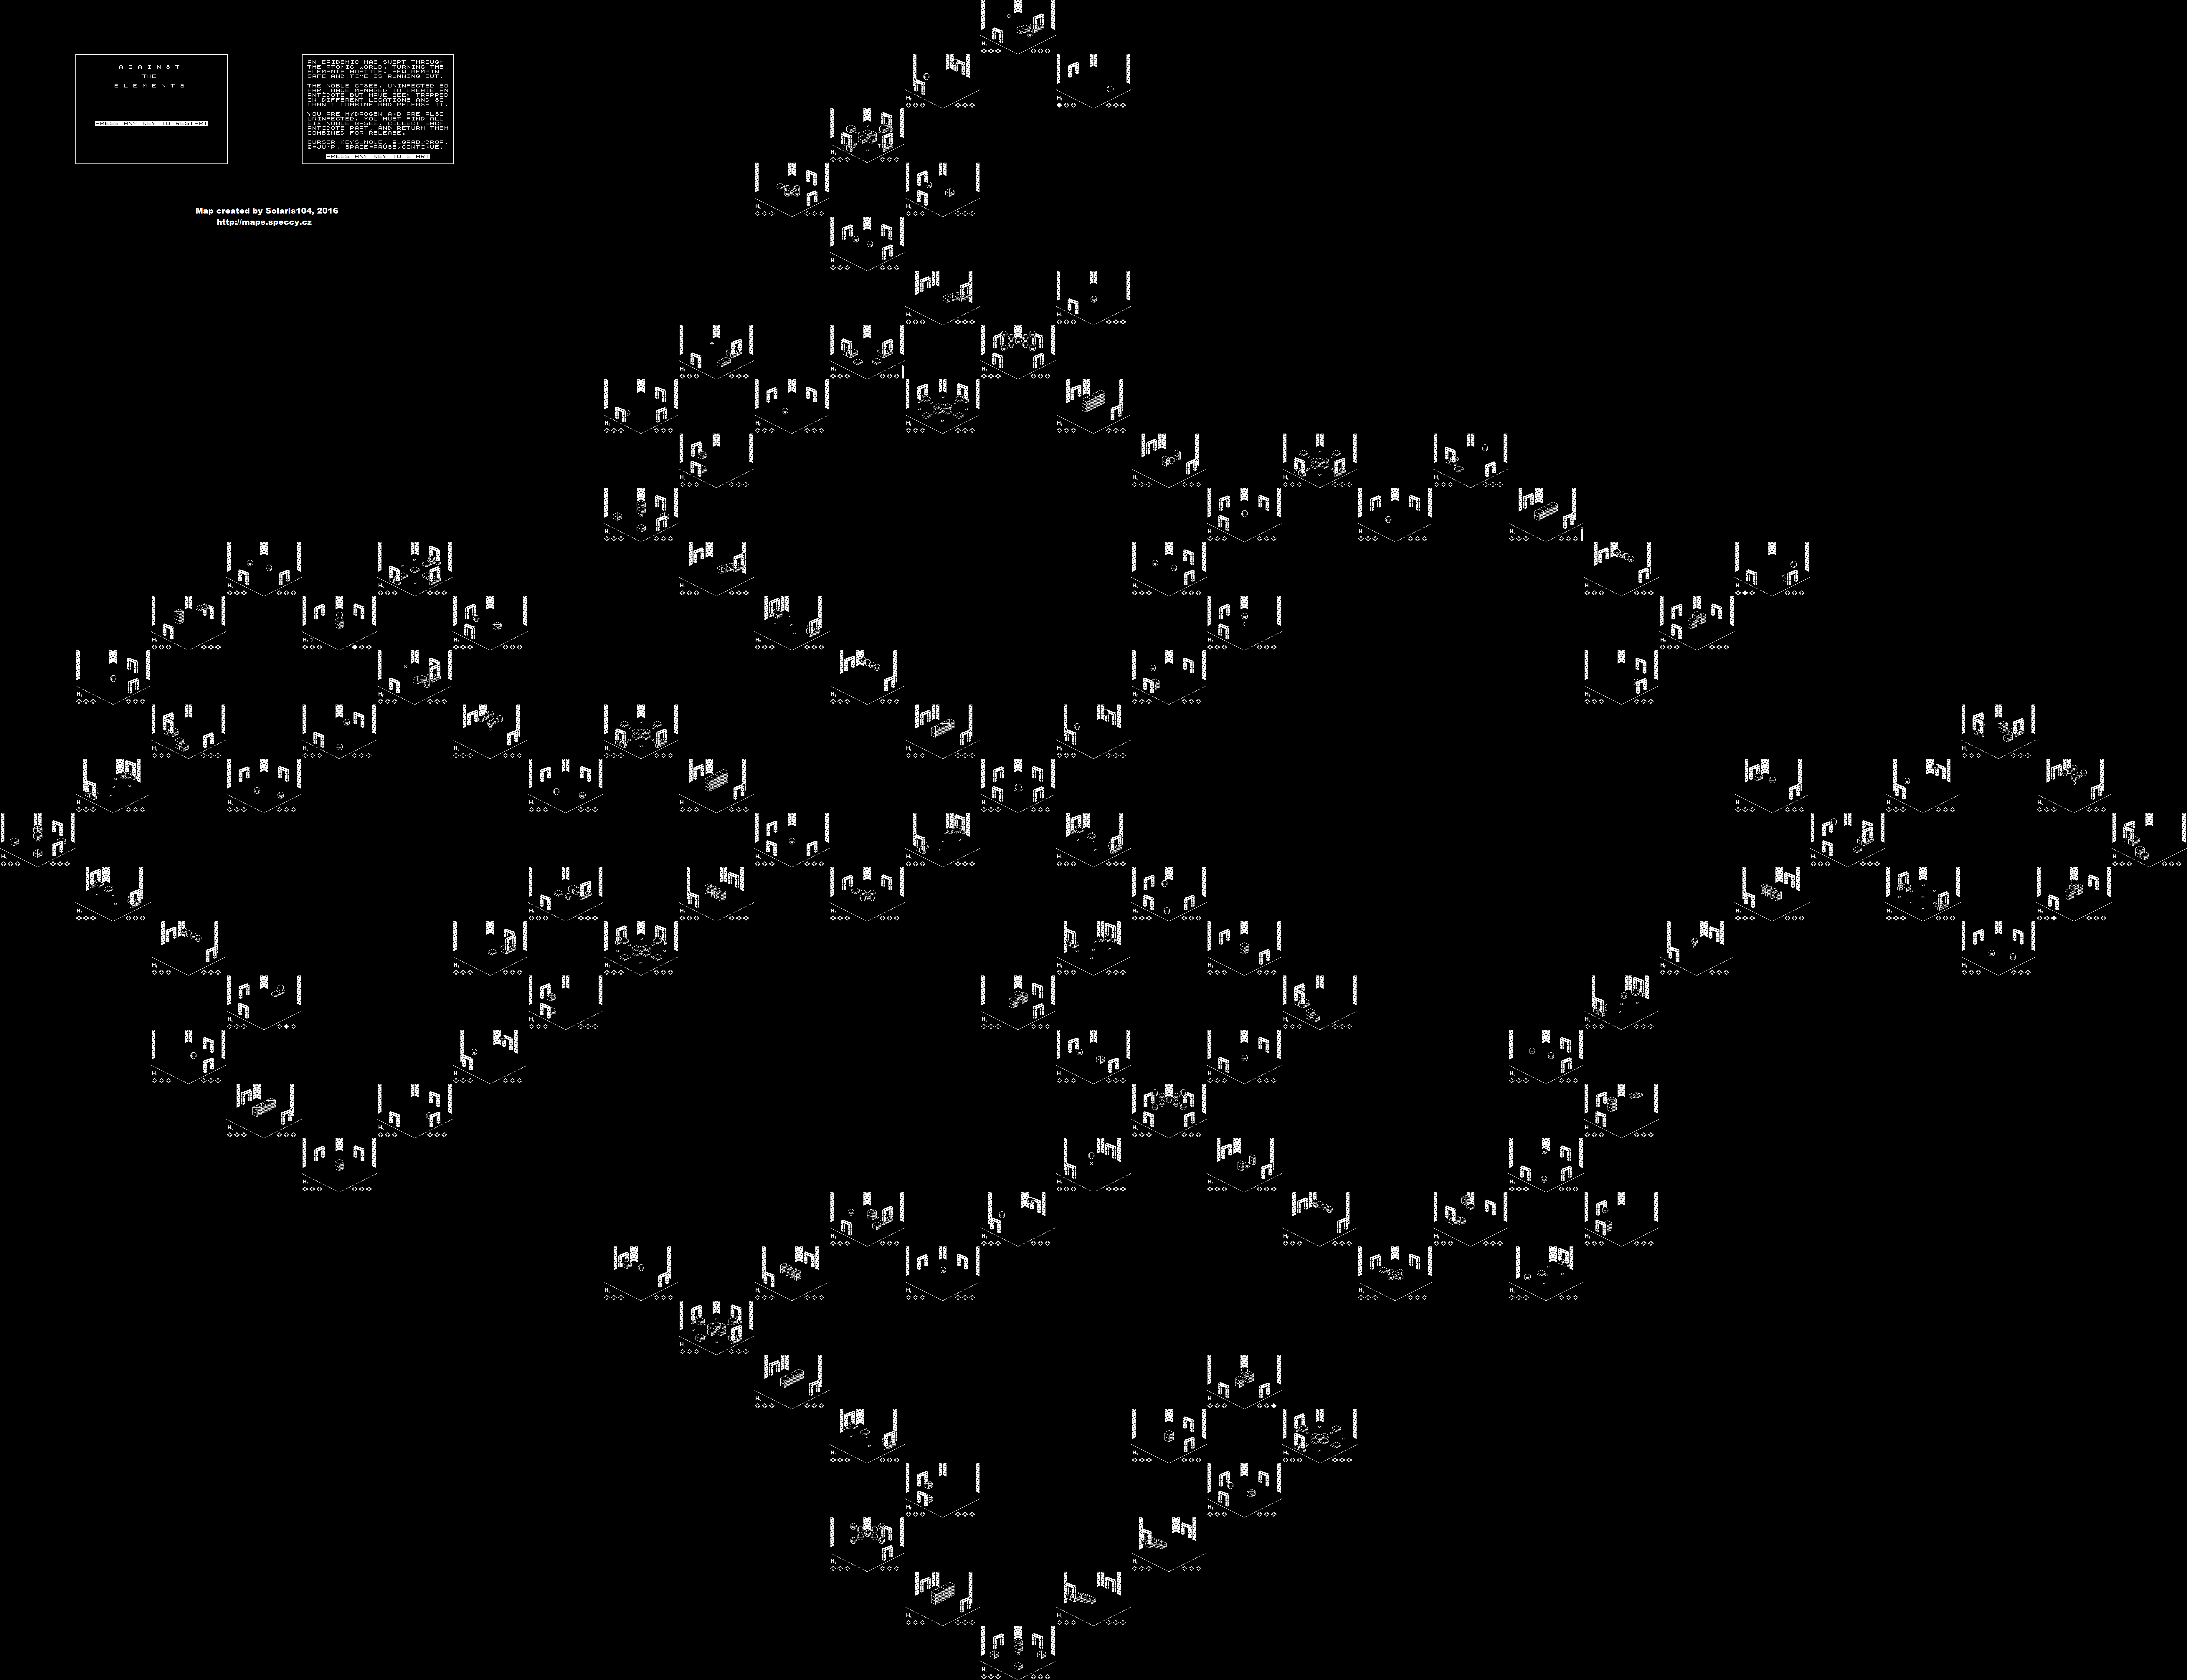 Against the Elements (ZX81) - The Map